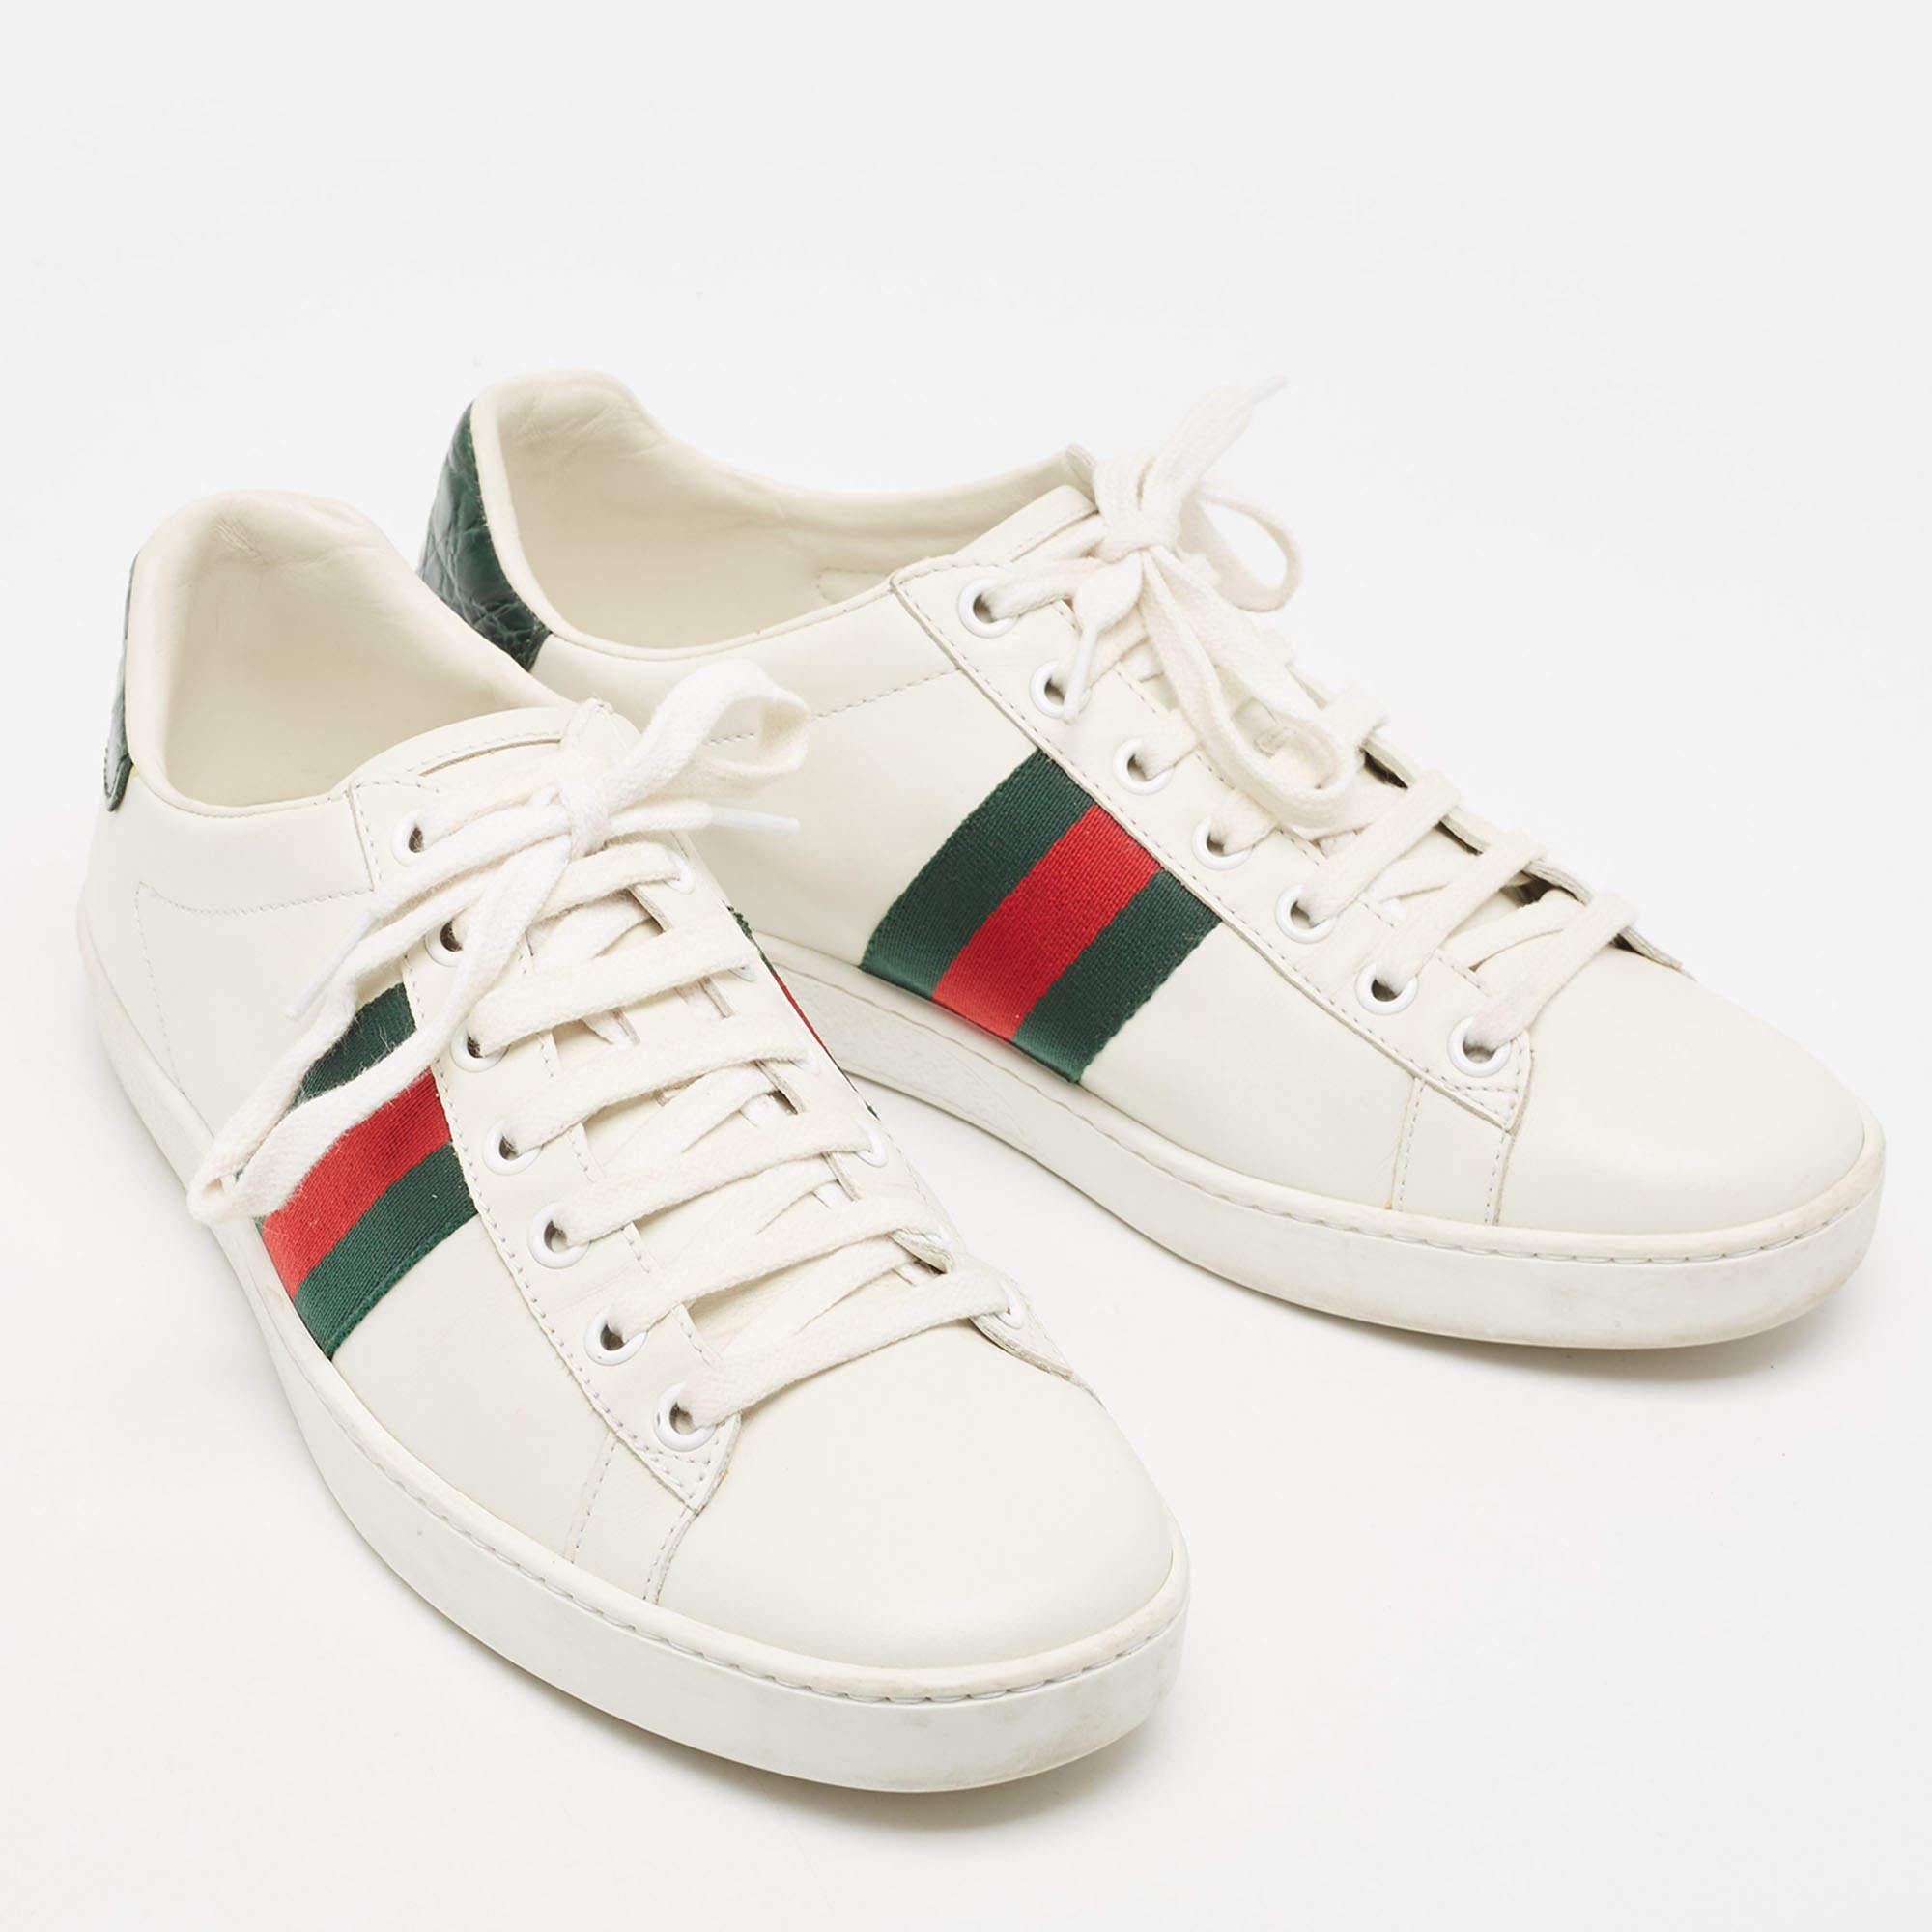 Gucci White/Green Cro Embossed and Leather Ace Sneakers Size 38 For Sale 2